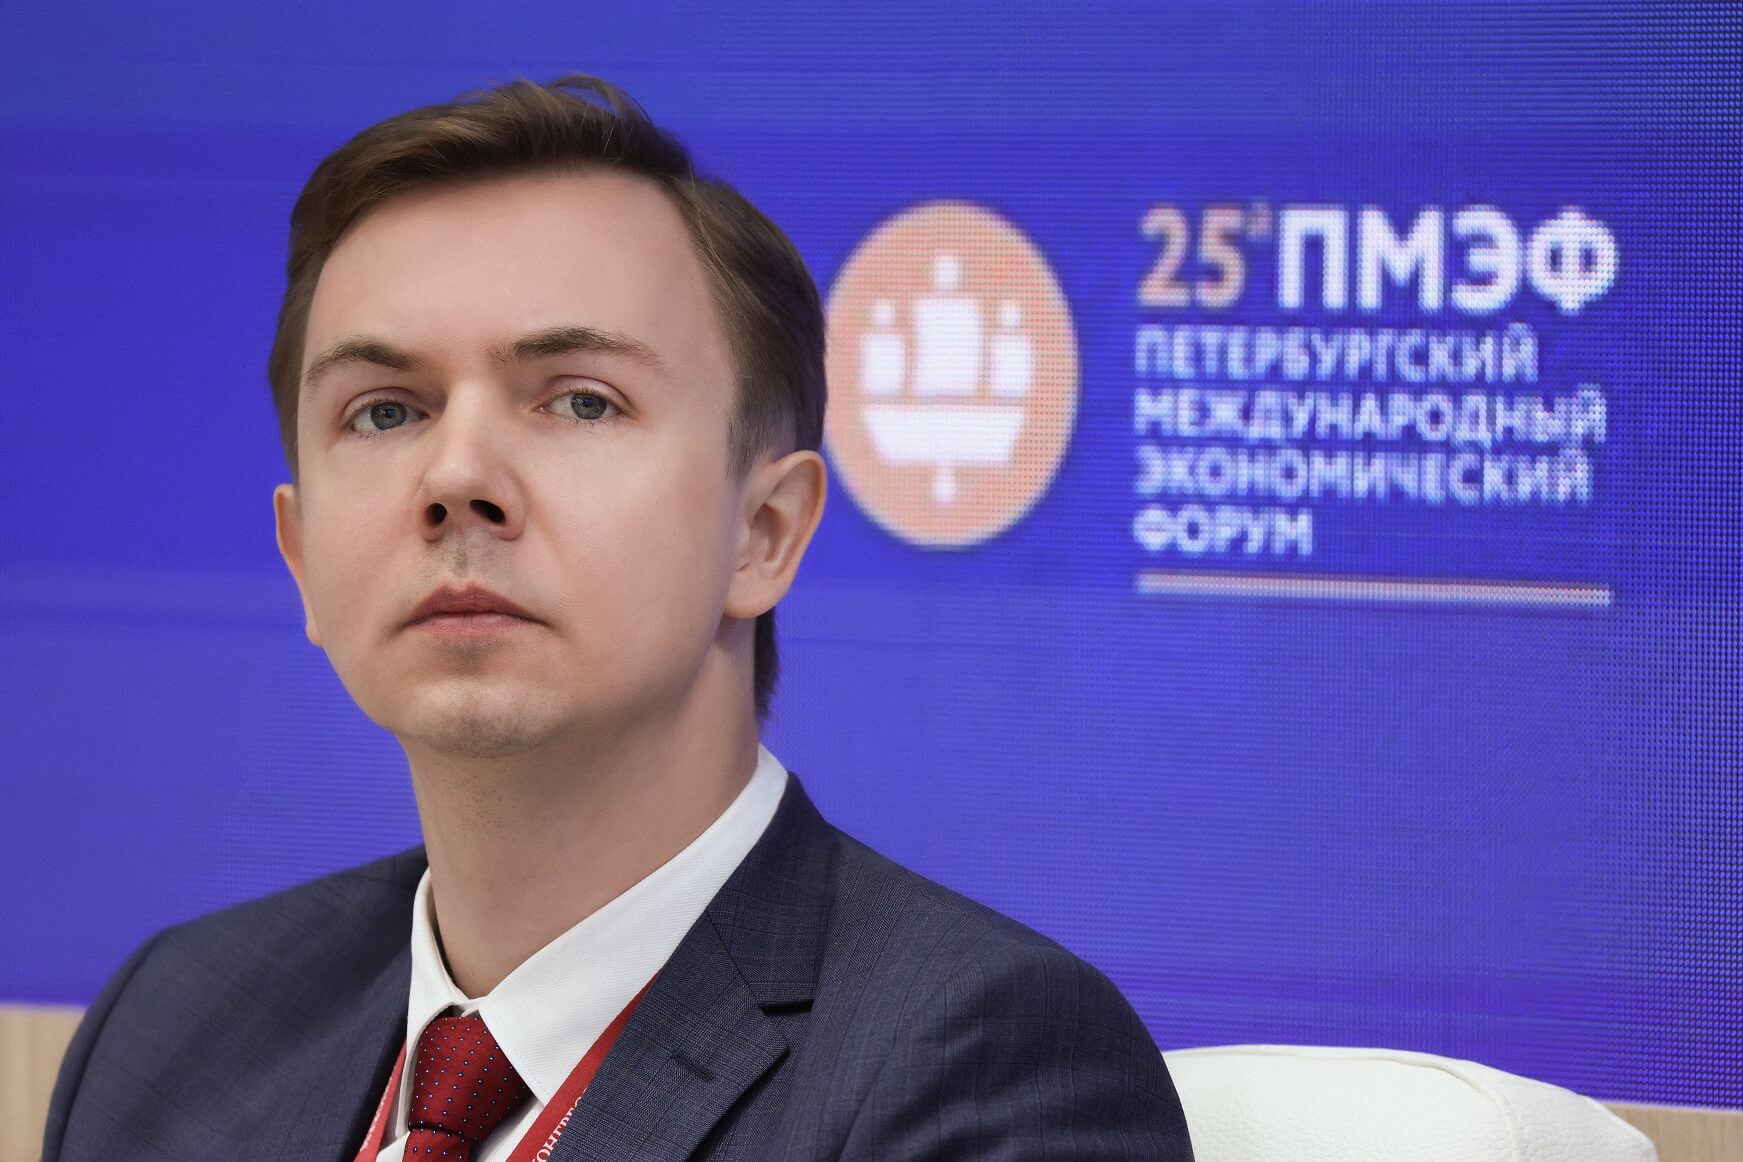 Import substitution, manufacturing of me-too medicines and investments in Science. Discussed on SPIEF: how Russia can ensure medicine independence